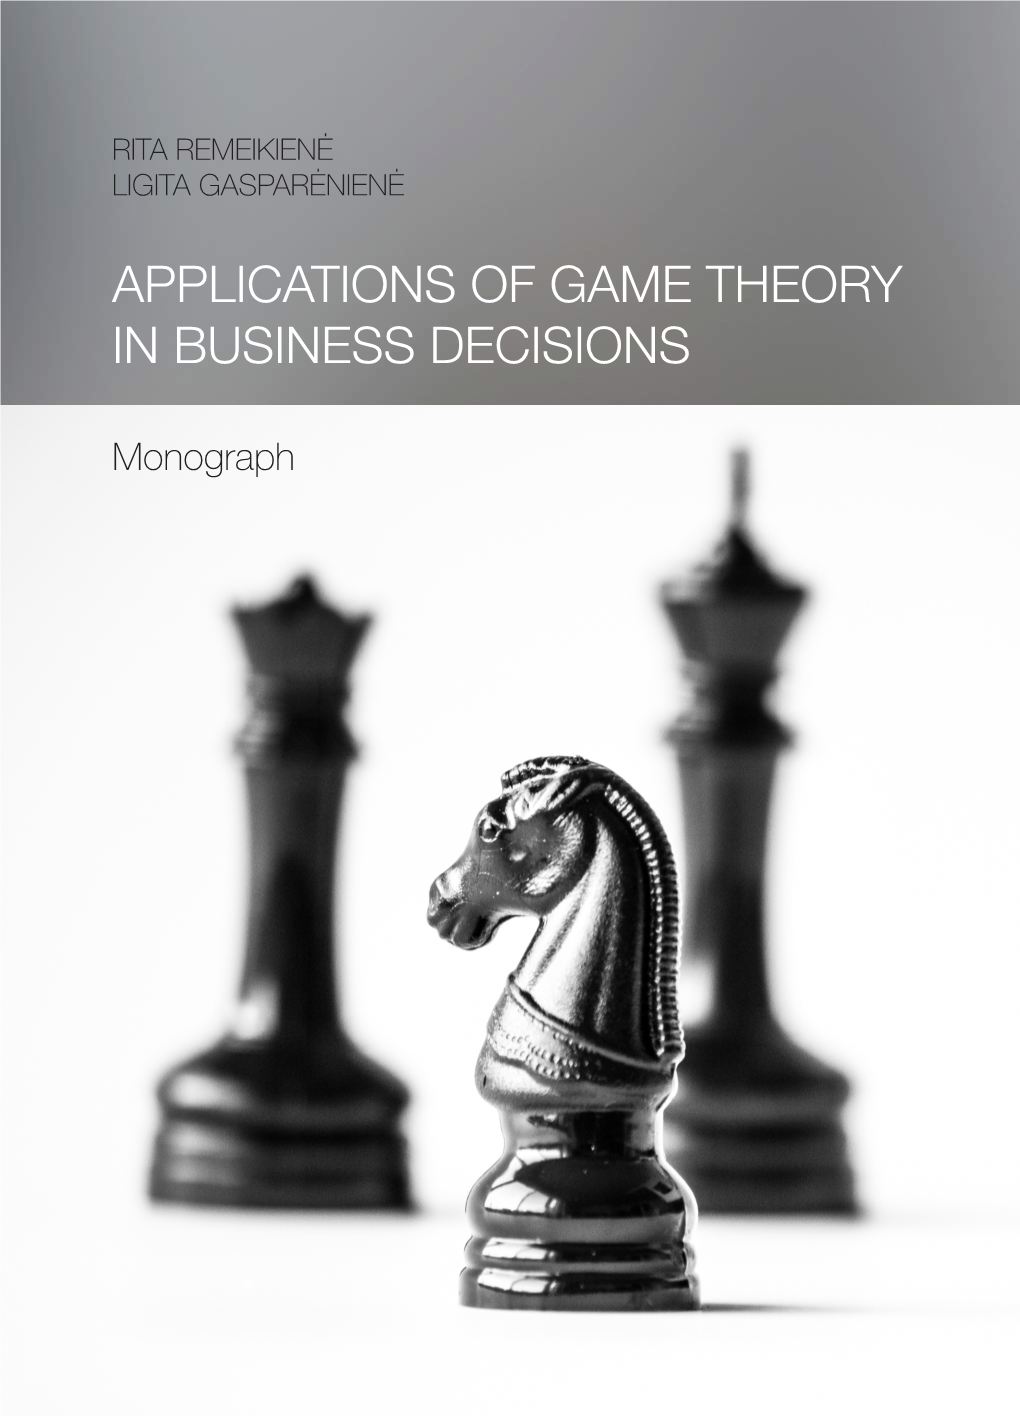 Applications of Game Theory in Business Decisions